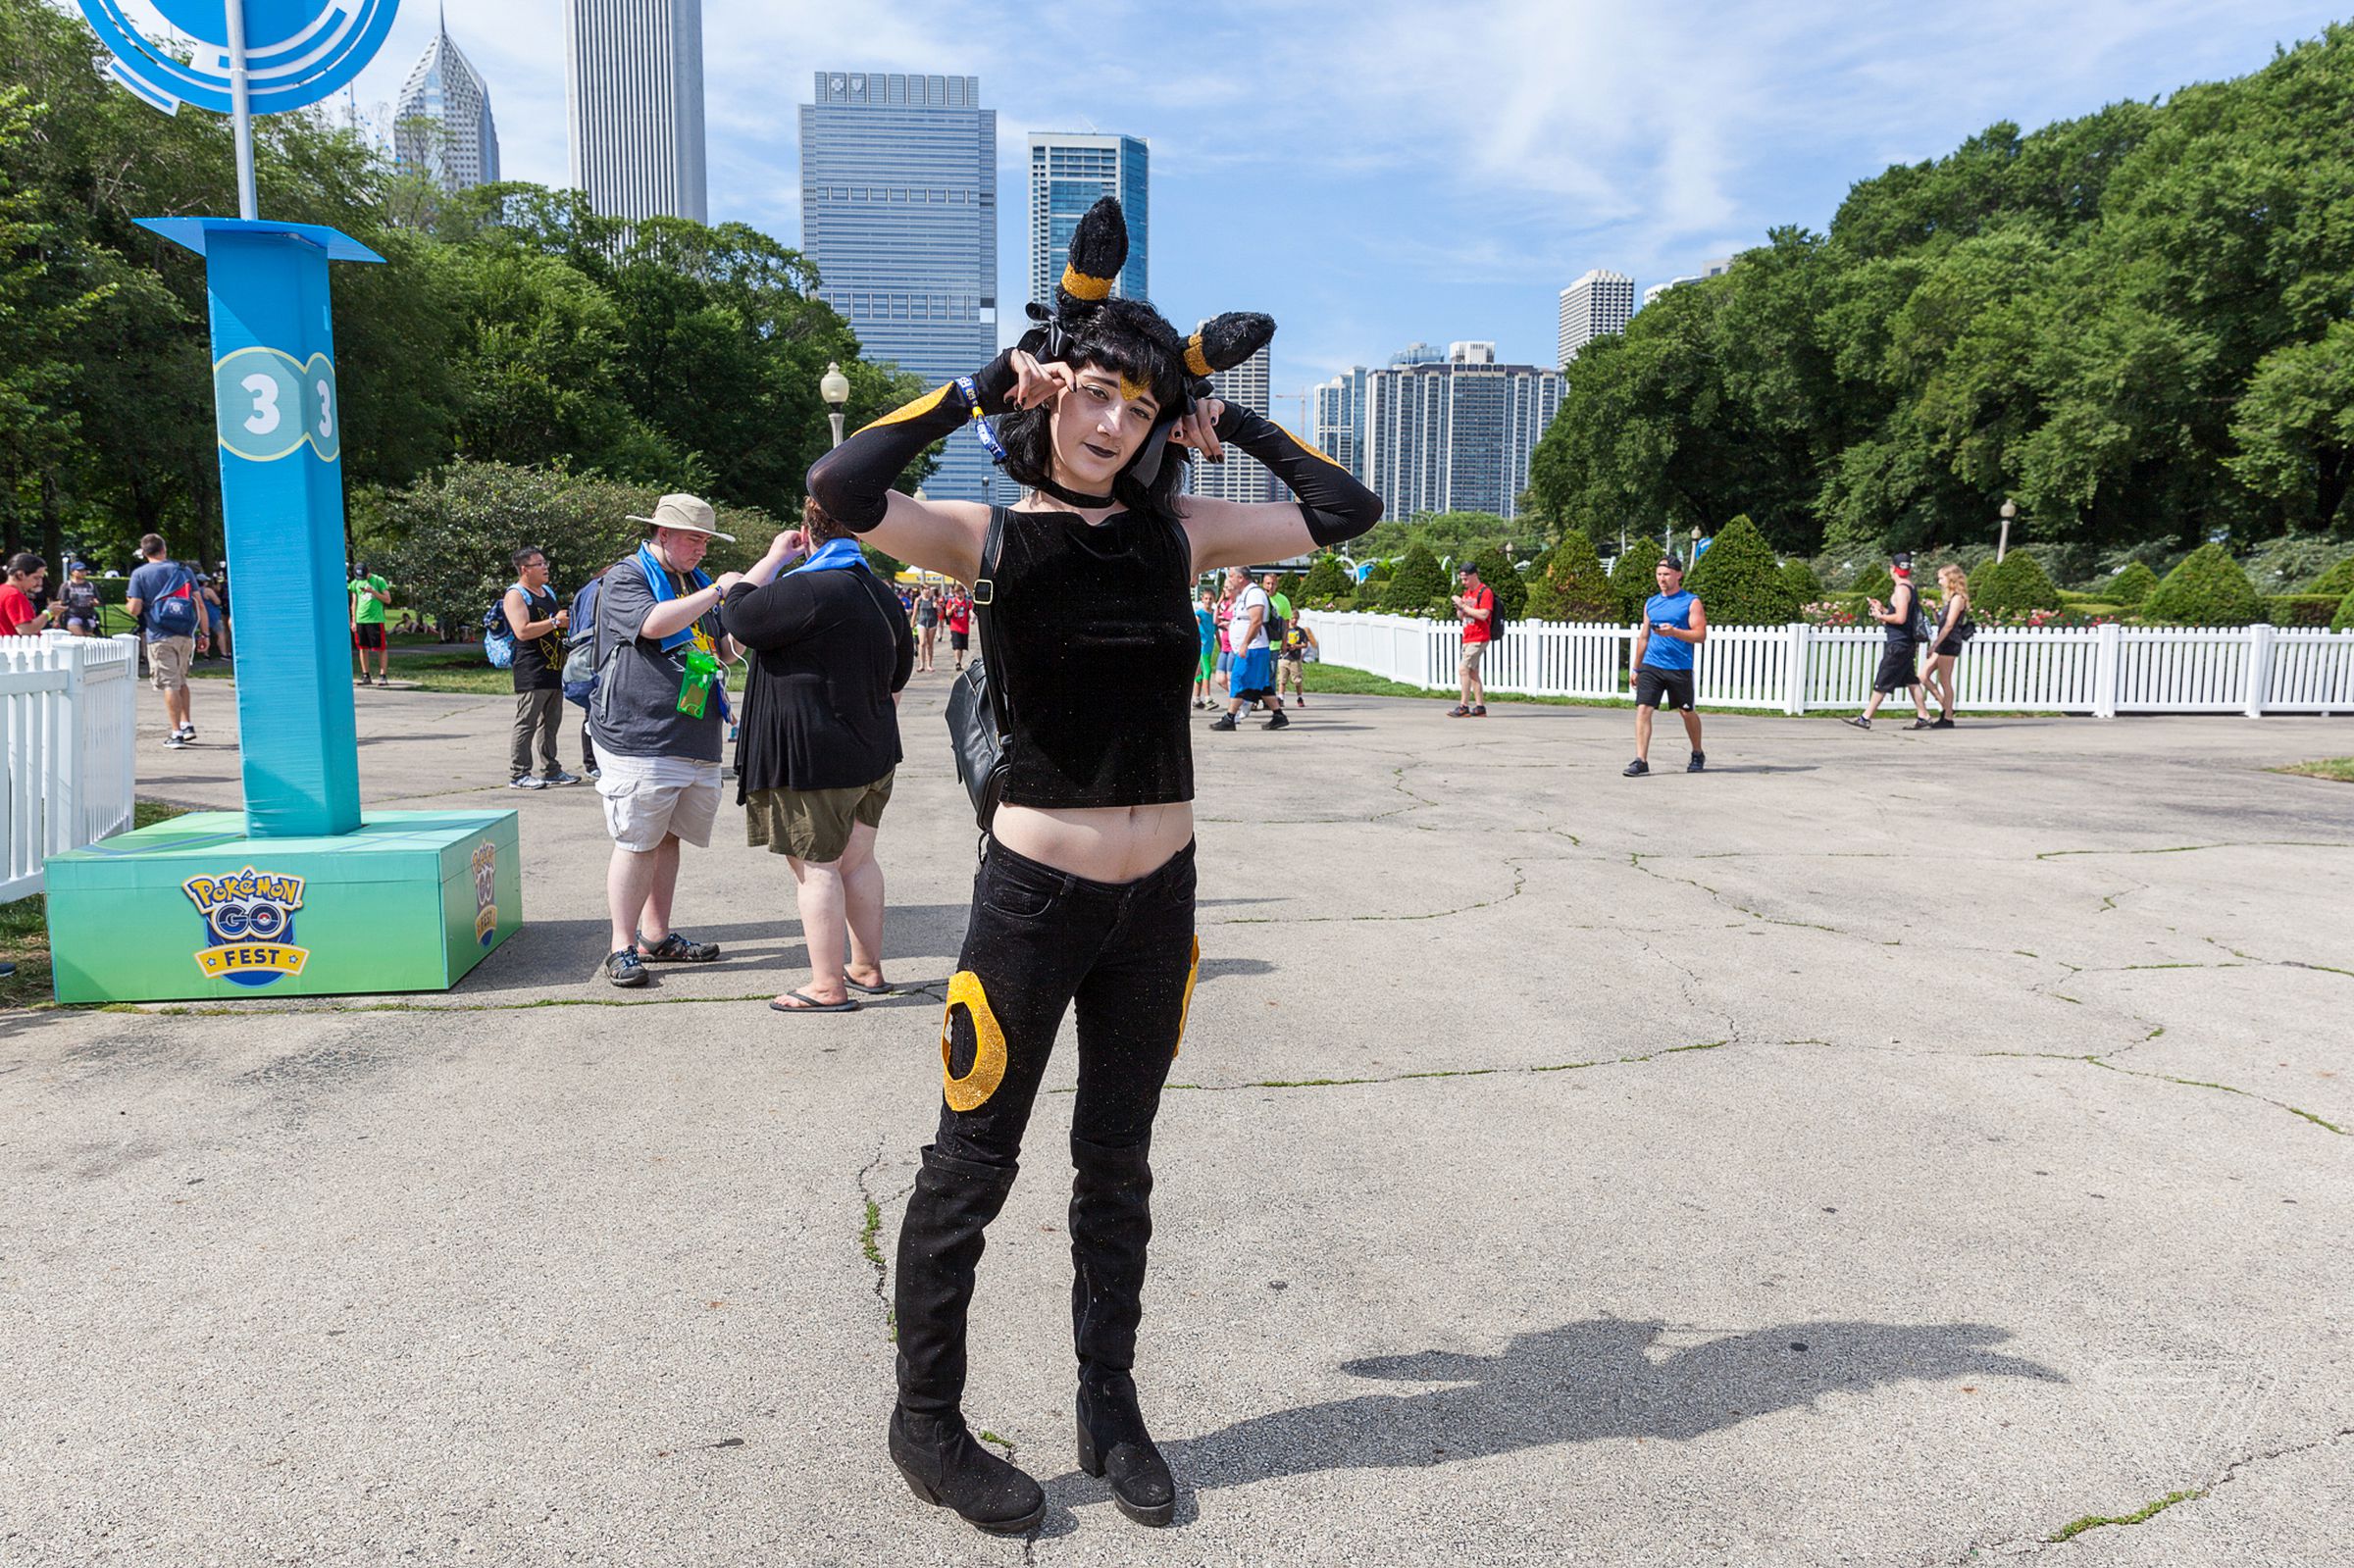 A fan dressed as an Umbreon